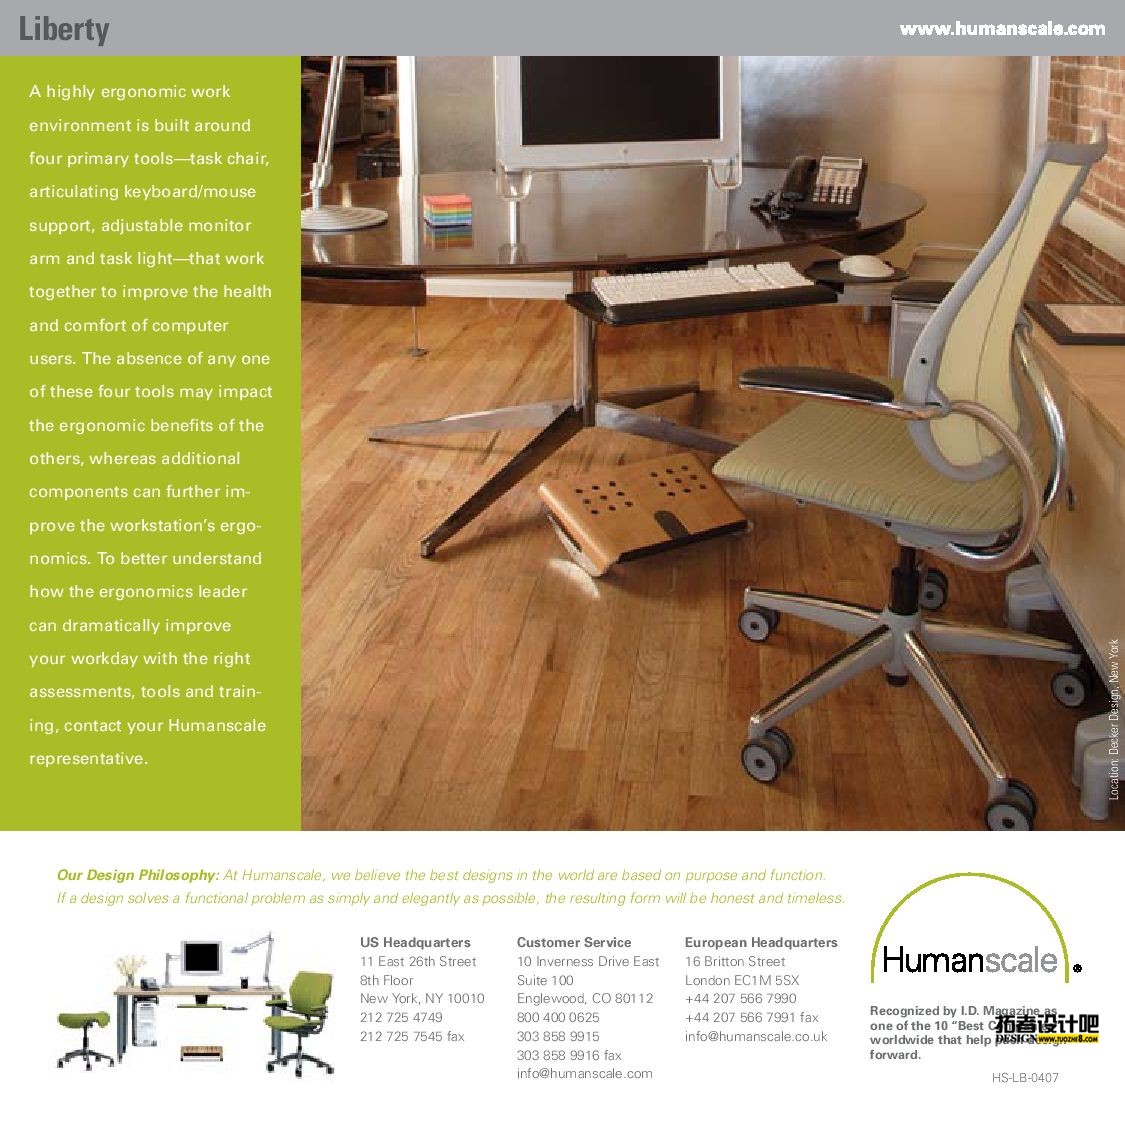 Humanscale Liberty chairpage_12.jpg